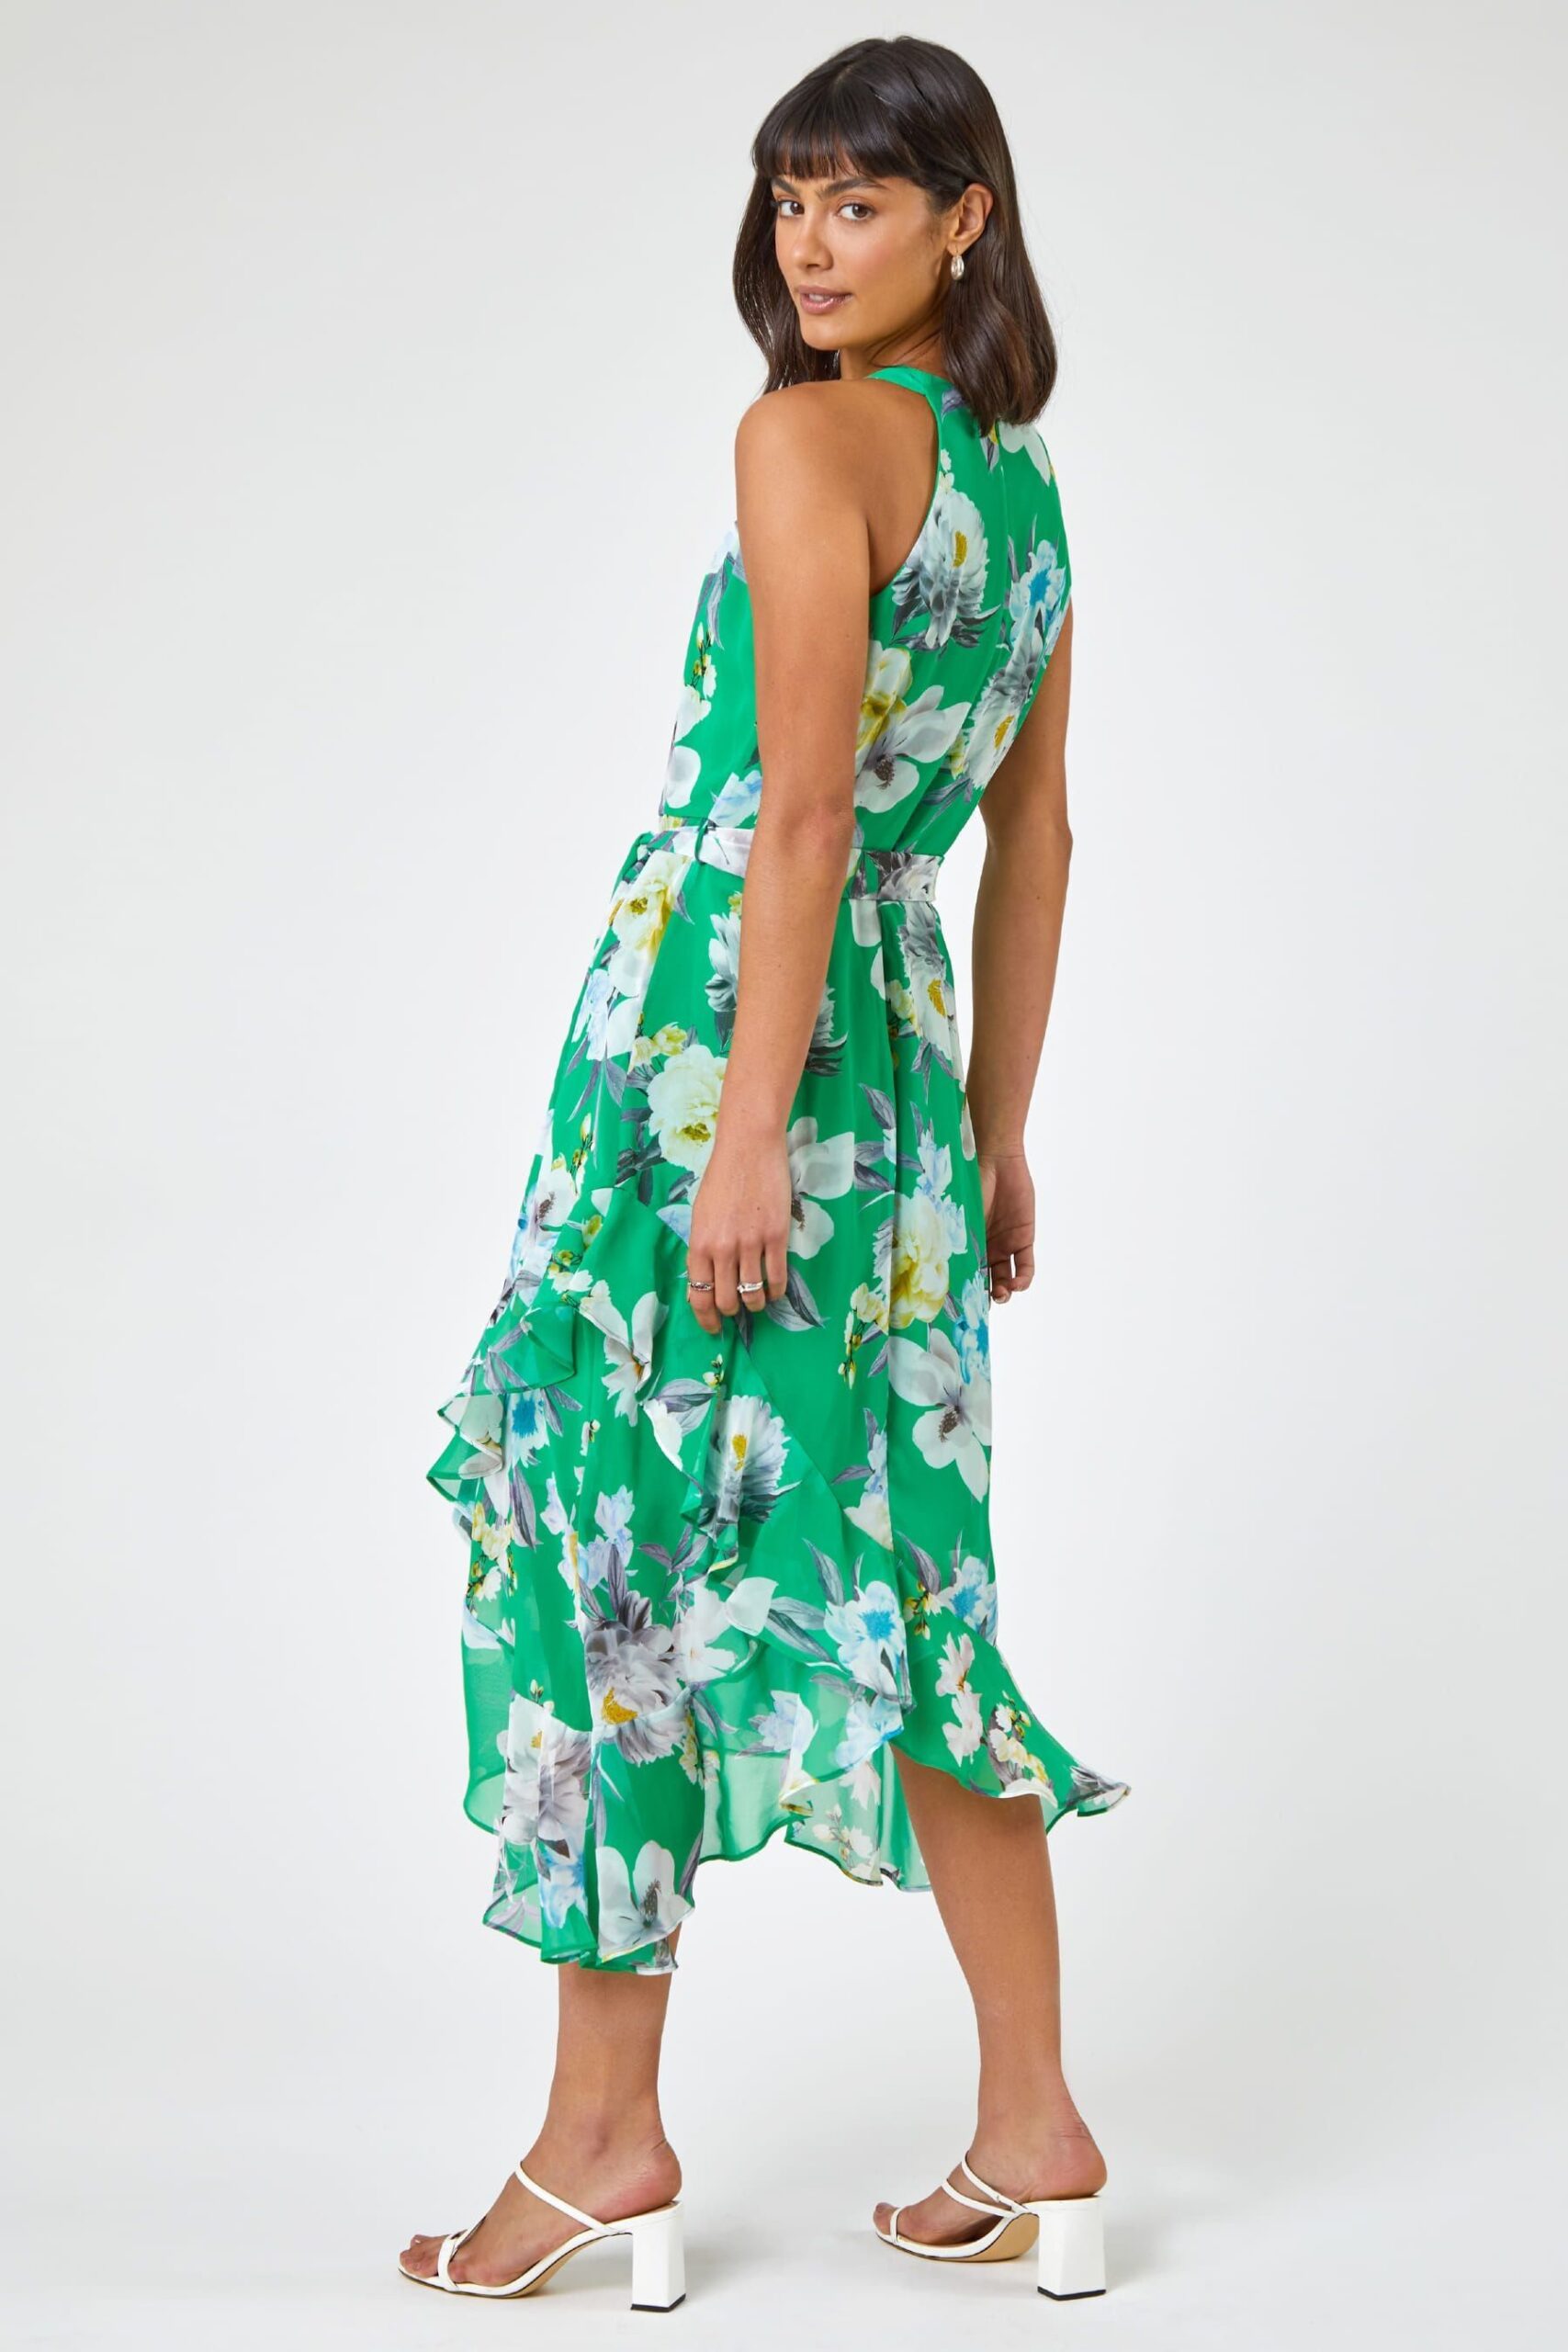 Green Midi Dress Outfits for
  Ladies